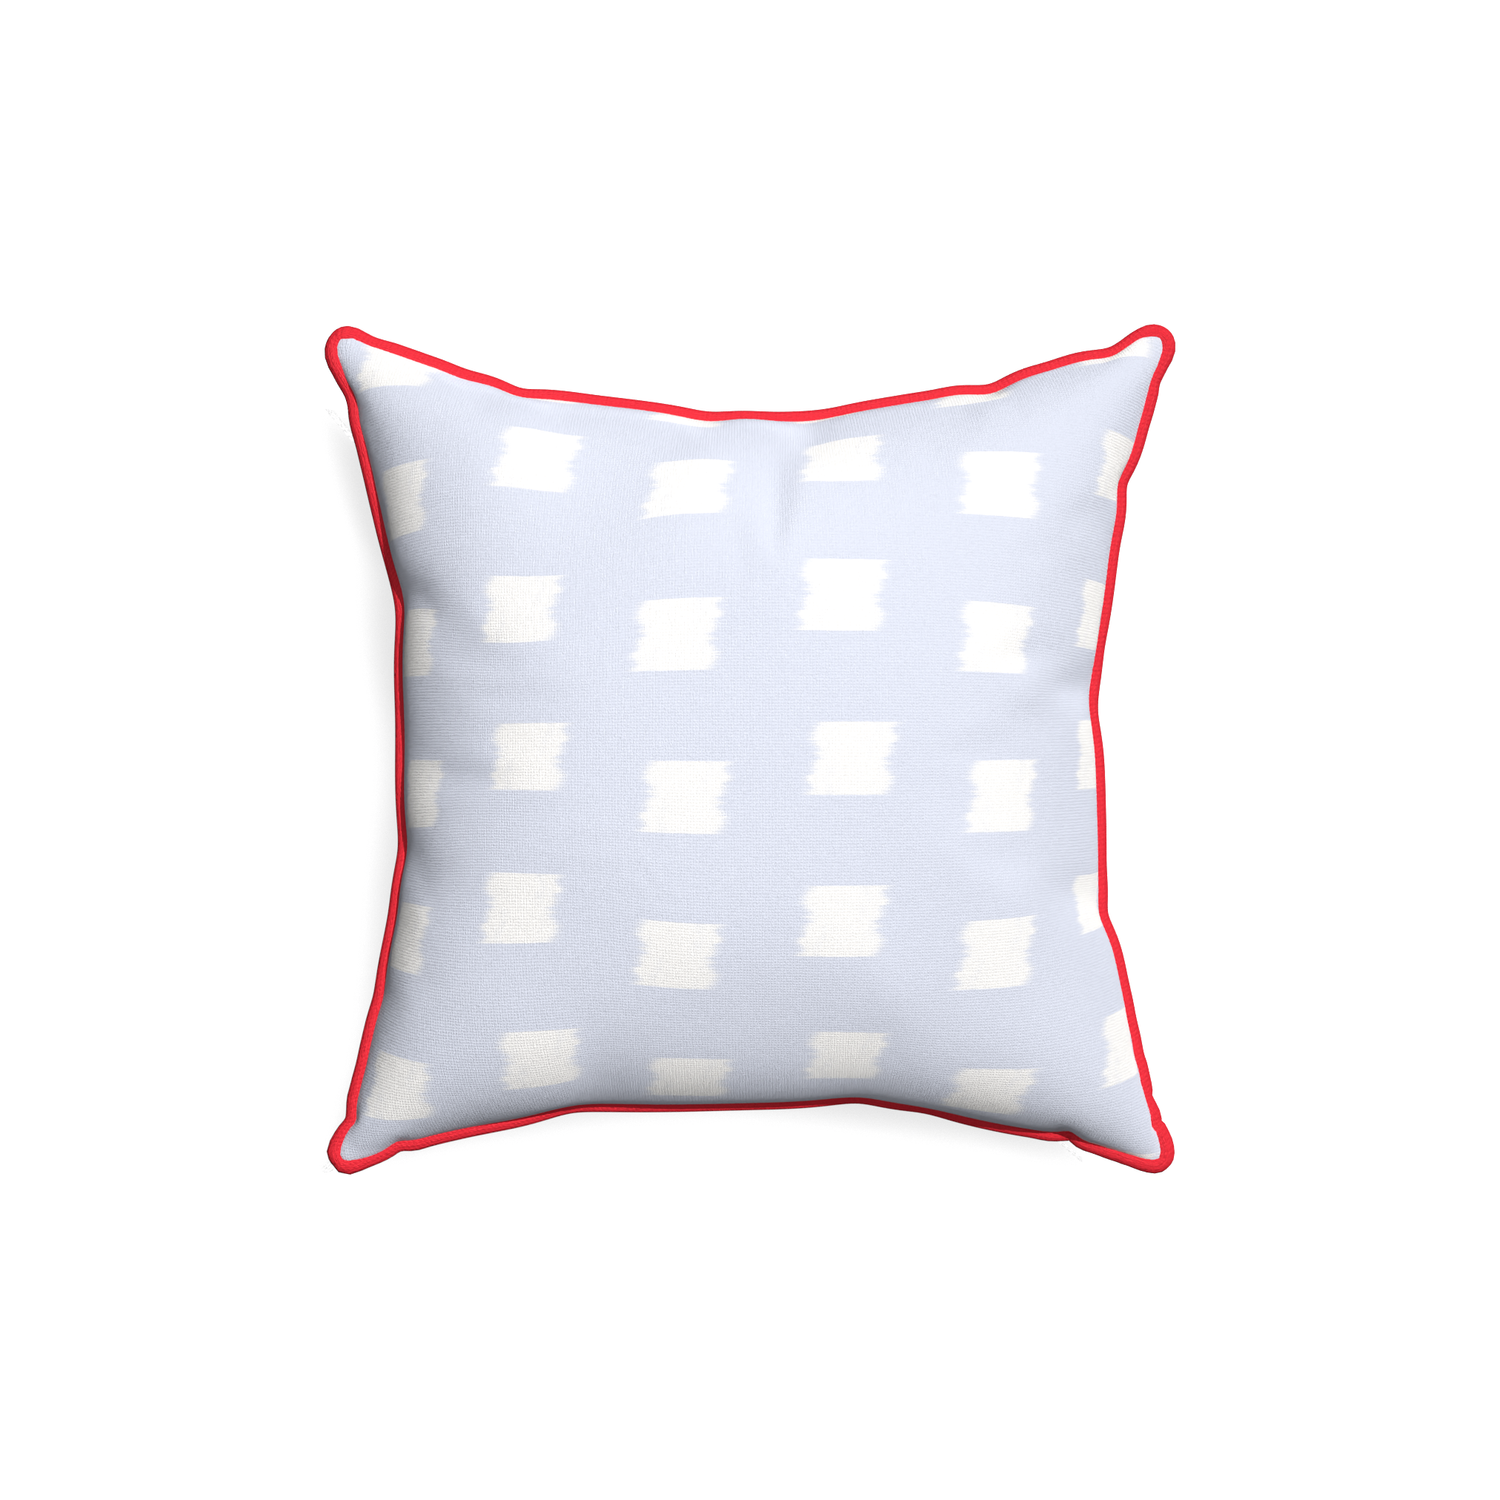 18-square denton custom sky blue patternpillow with cherry piping on white background